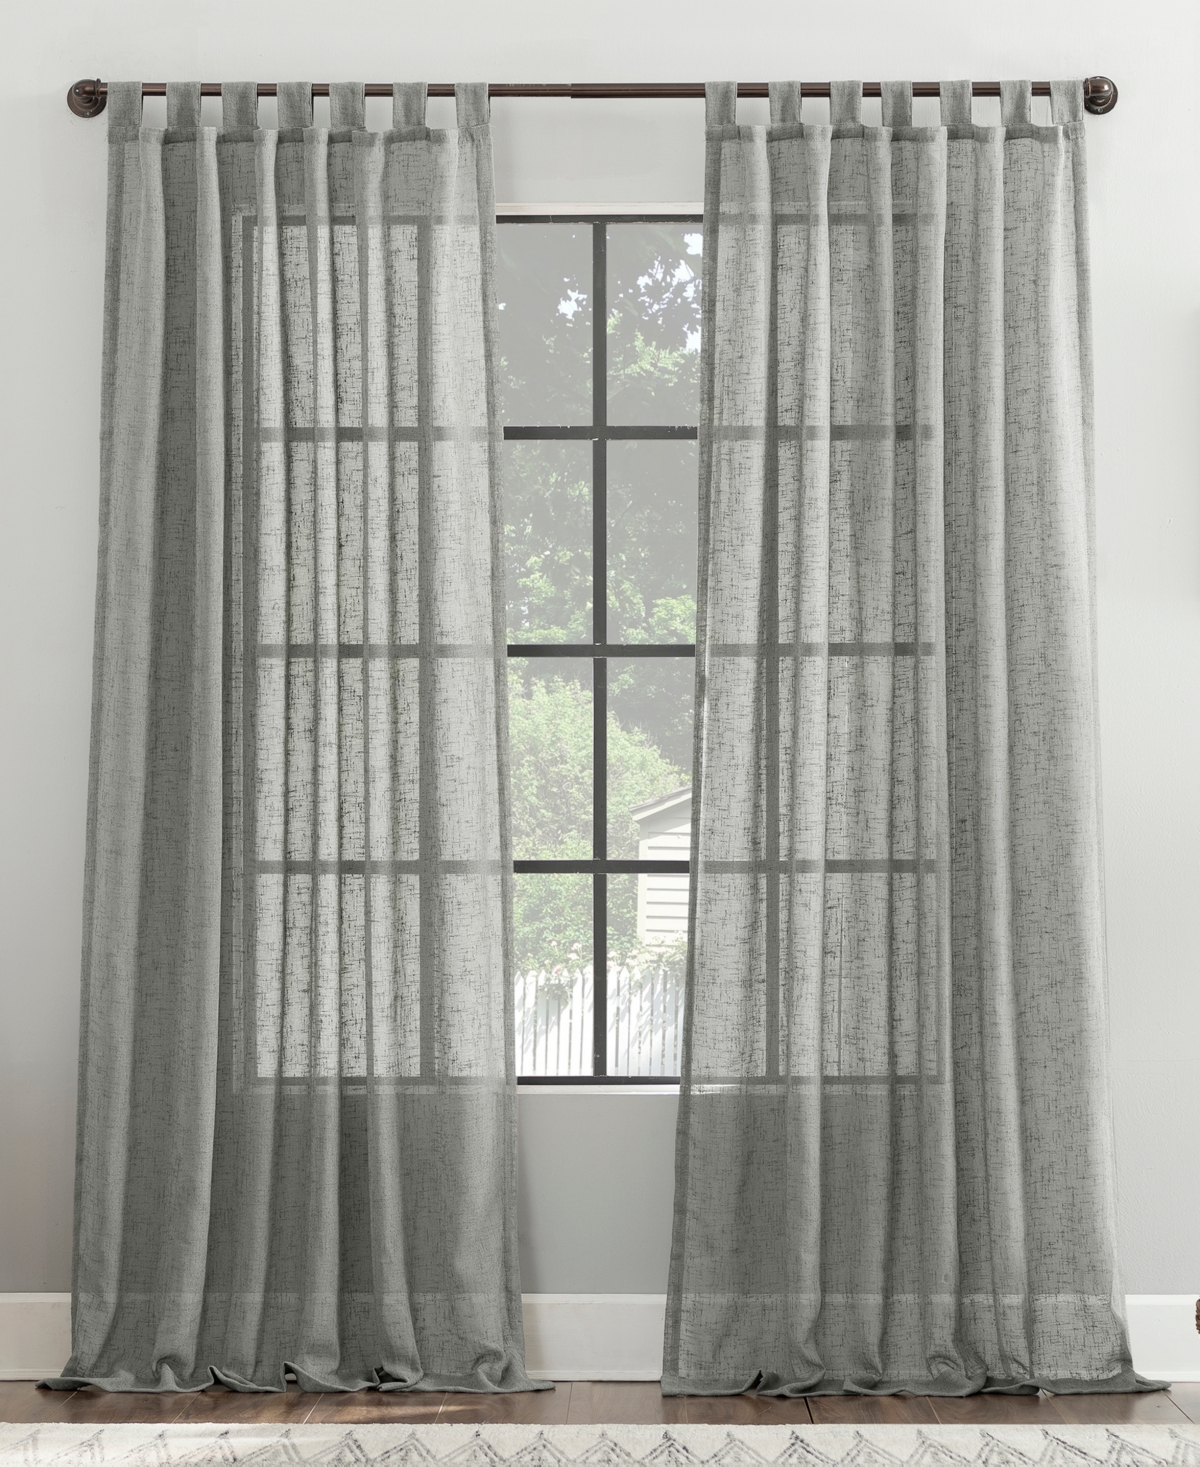 Archaeo Tansy Burlap Weave Tab Top Curtain Panel, 50"x 96" In Sterling